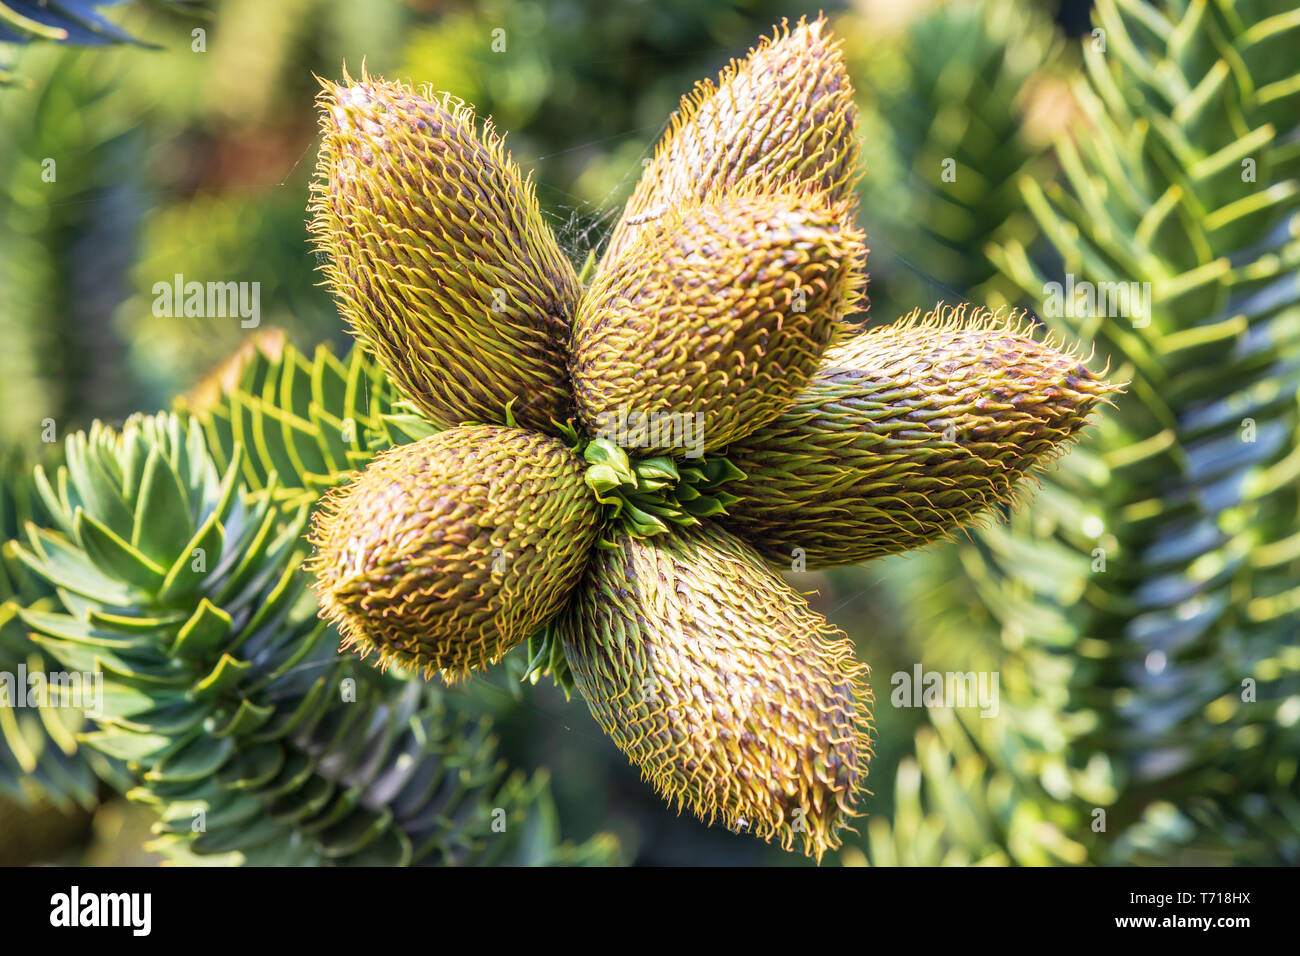 Araucaria Araucana - Monkey Puzzle tree.  A group of three male fruits.  This is the so called fossil tree. Stock Photo